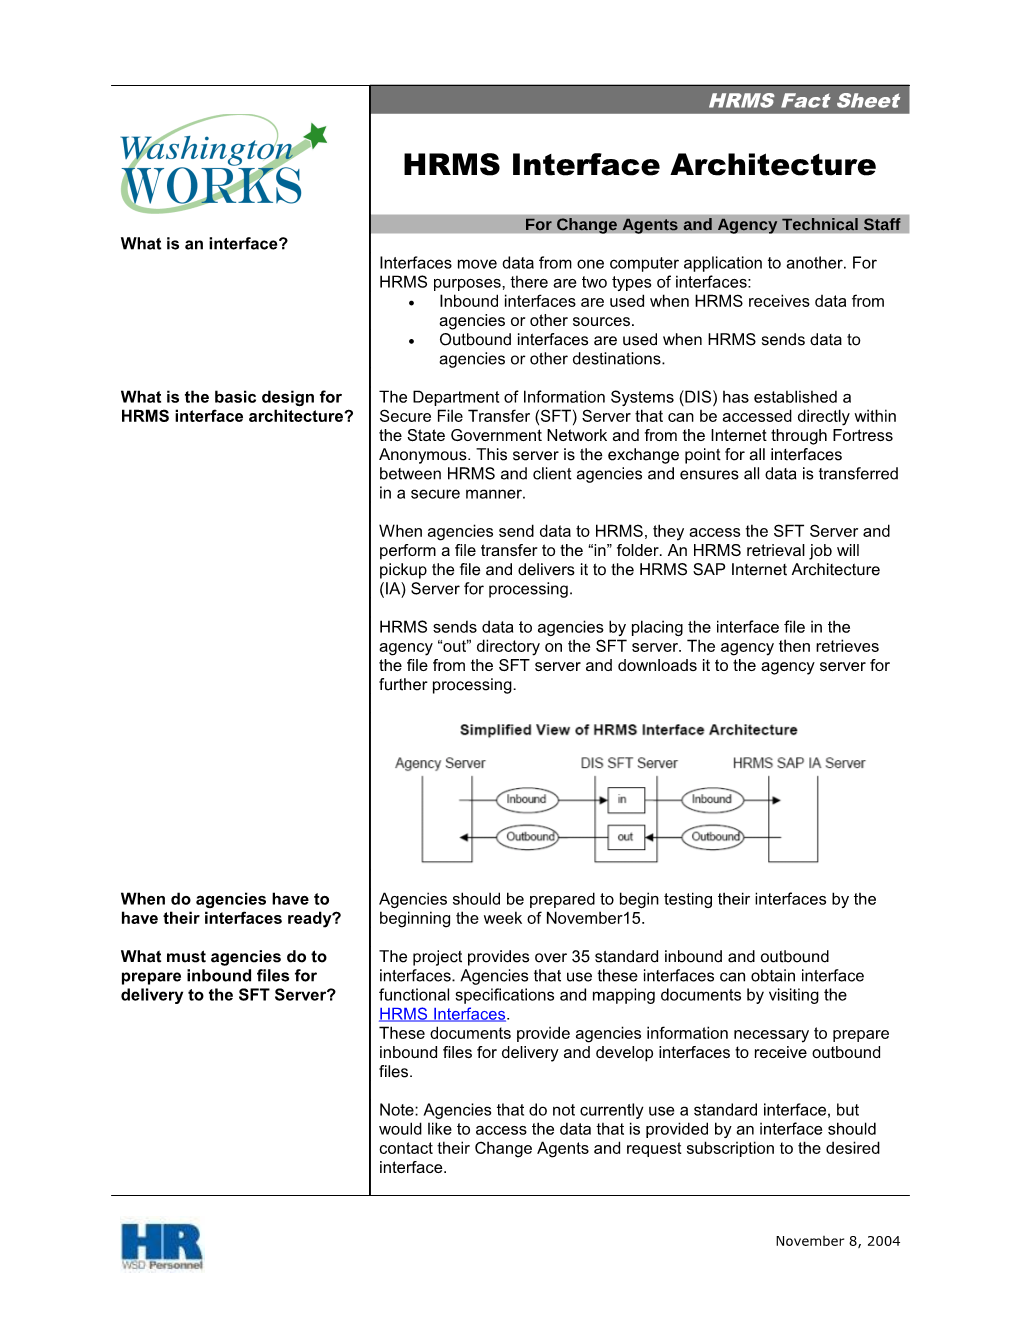 Inbound Interfaces Are Used When HRMS Receives Data Fromagencies Or Other Sources